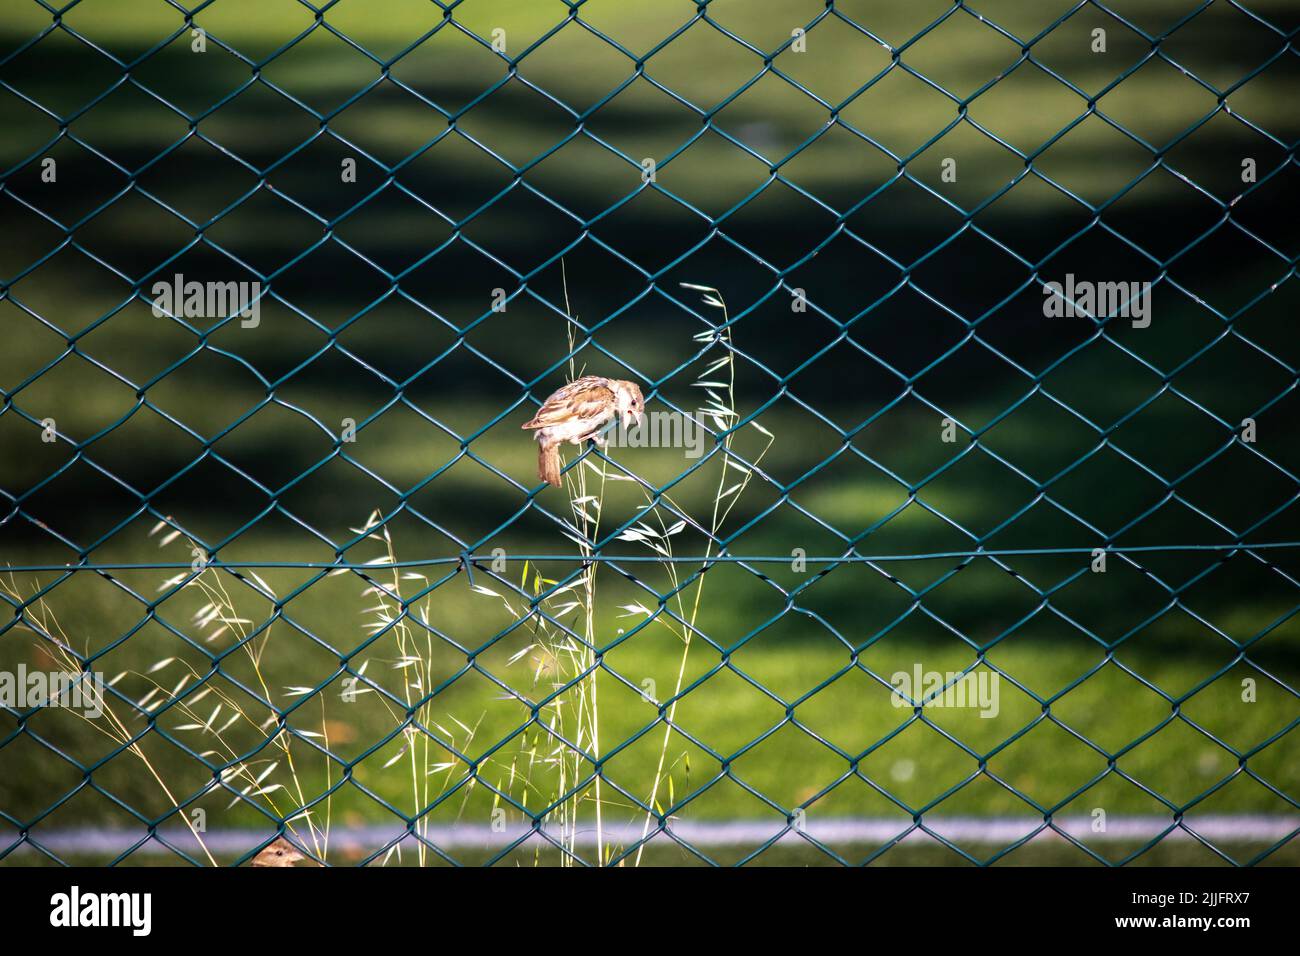 Sparrow isolated in front of natural green background, small sparrow sitting on the fence or wire netting. Bird idea concept. No people, nobody. Stock Photo